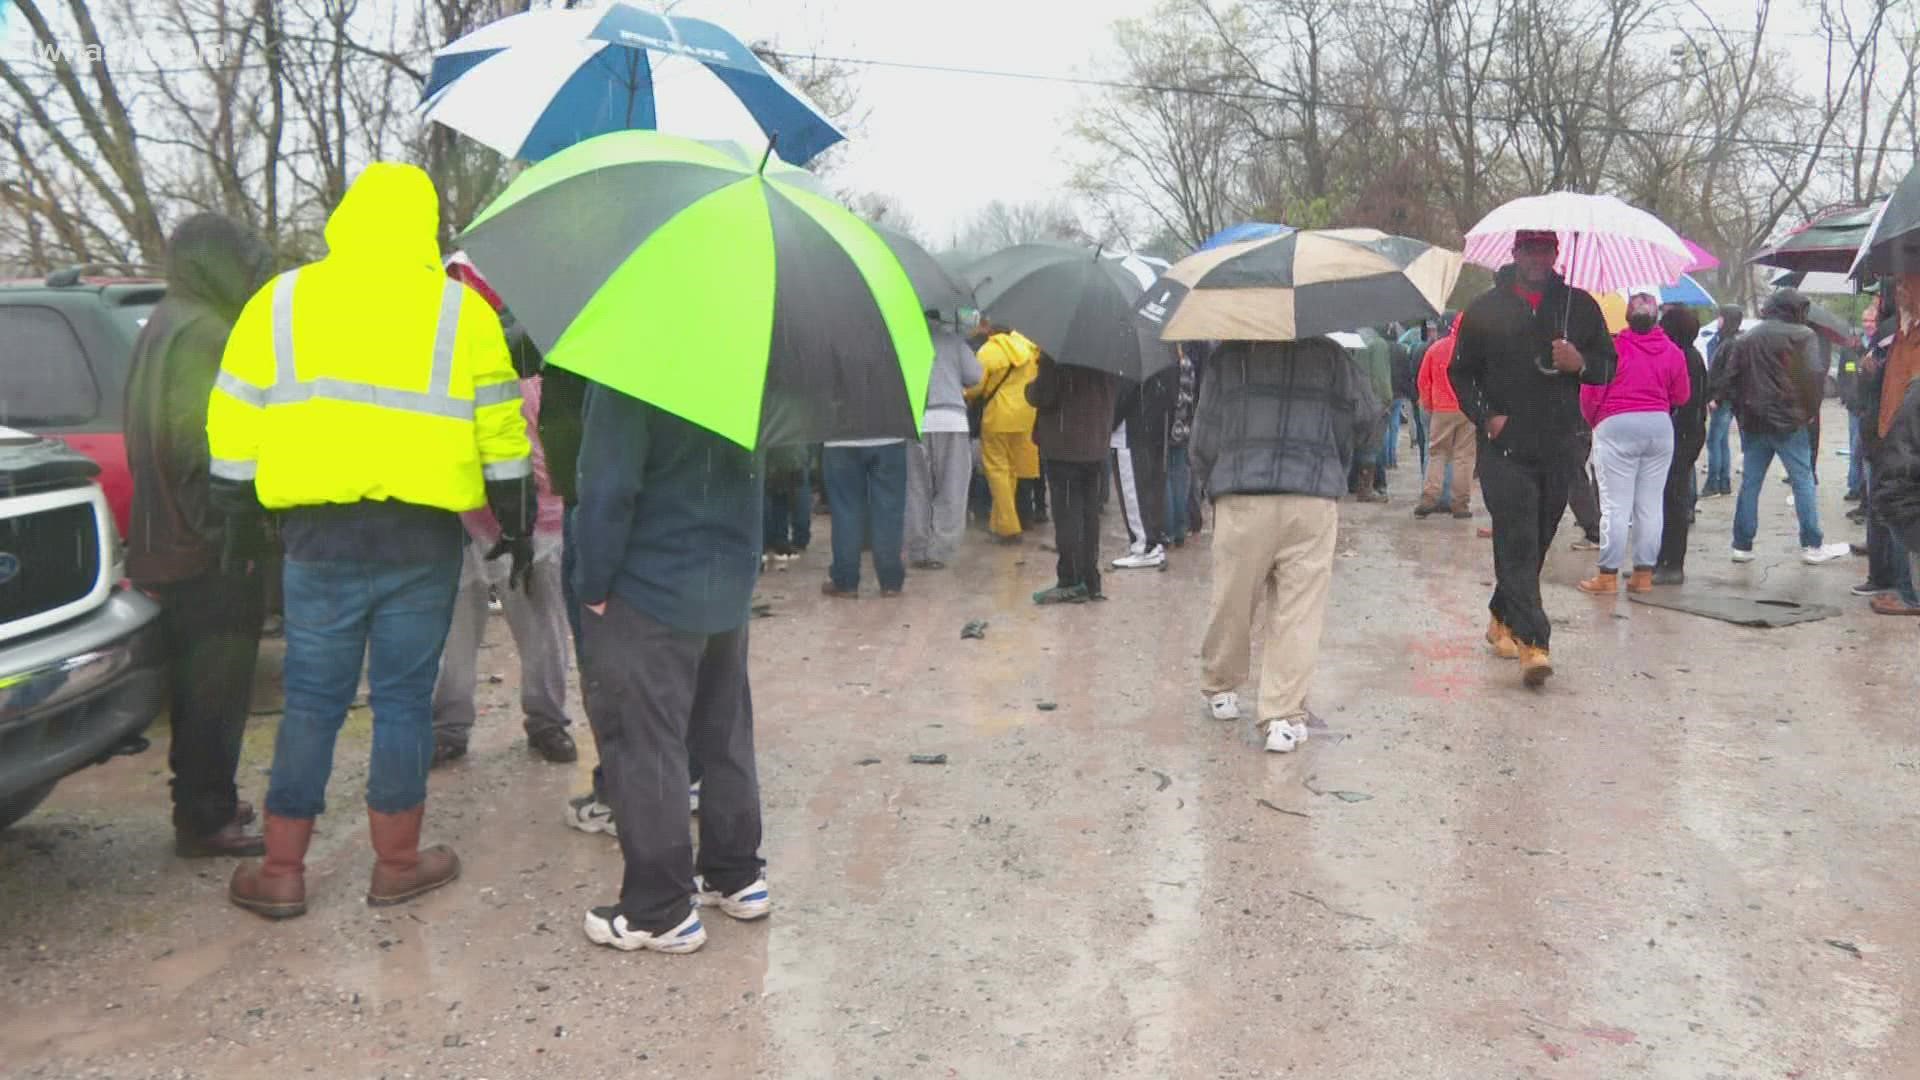 LMPD held the auction Wednesday as an effort to clear space in the Frankfort Avenue tow lot.